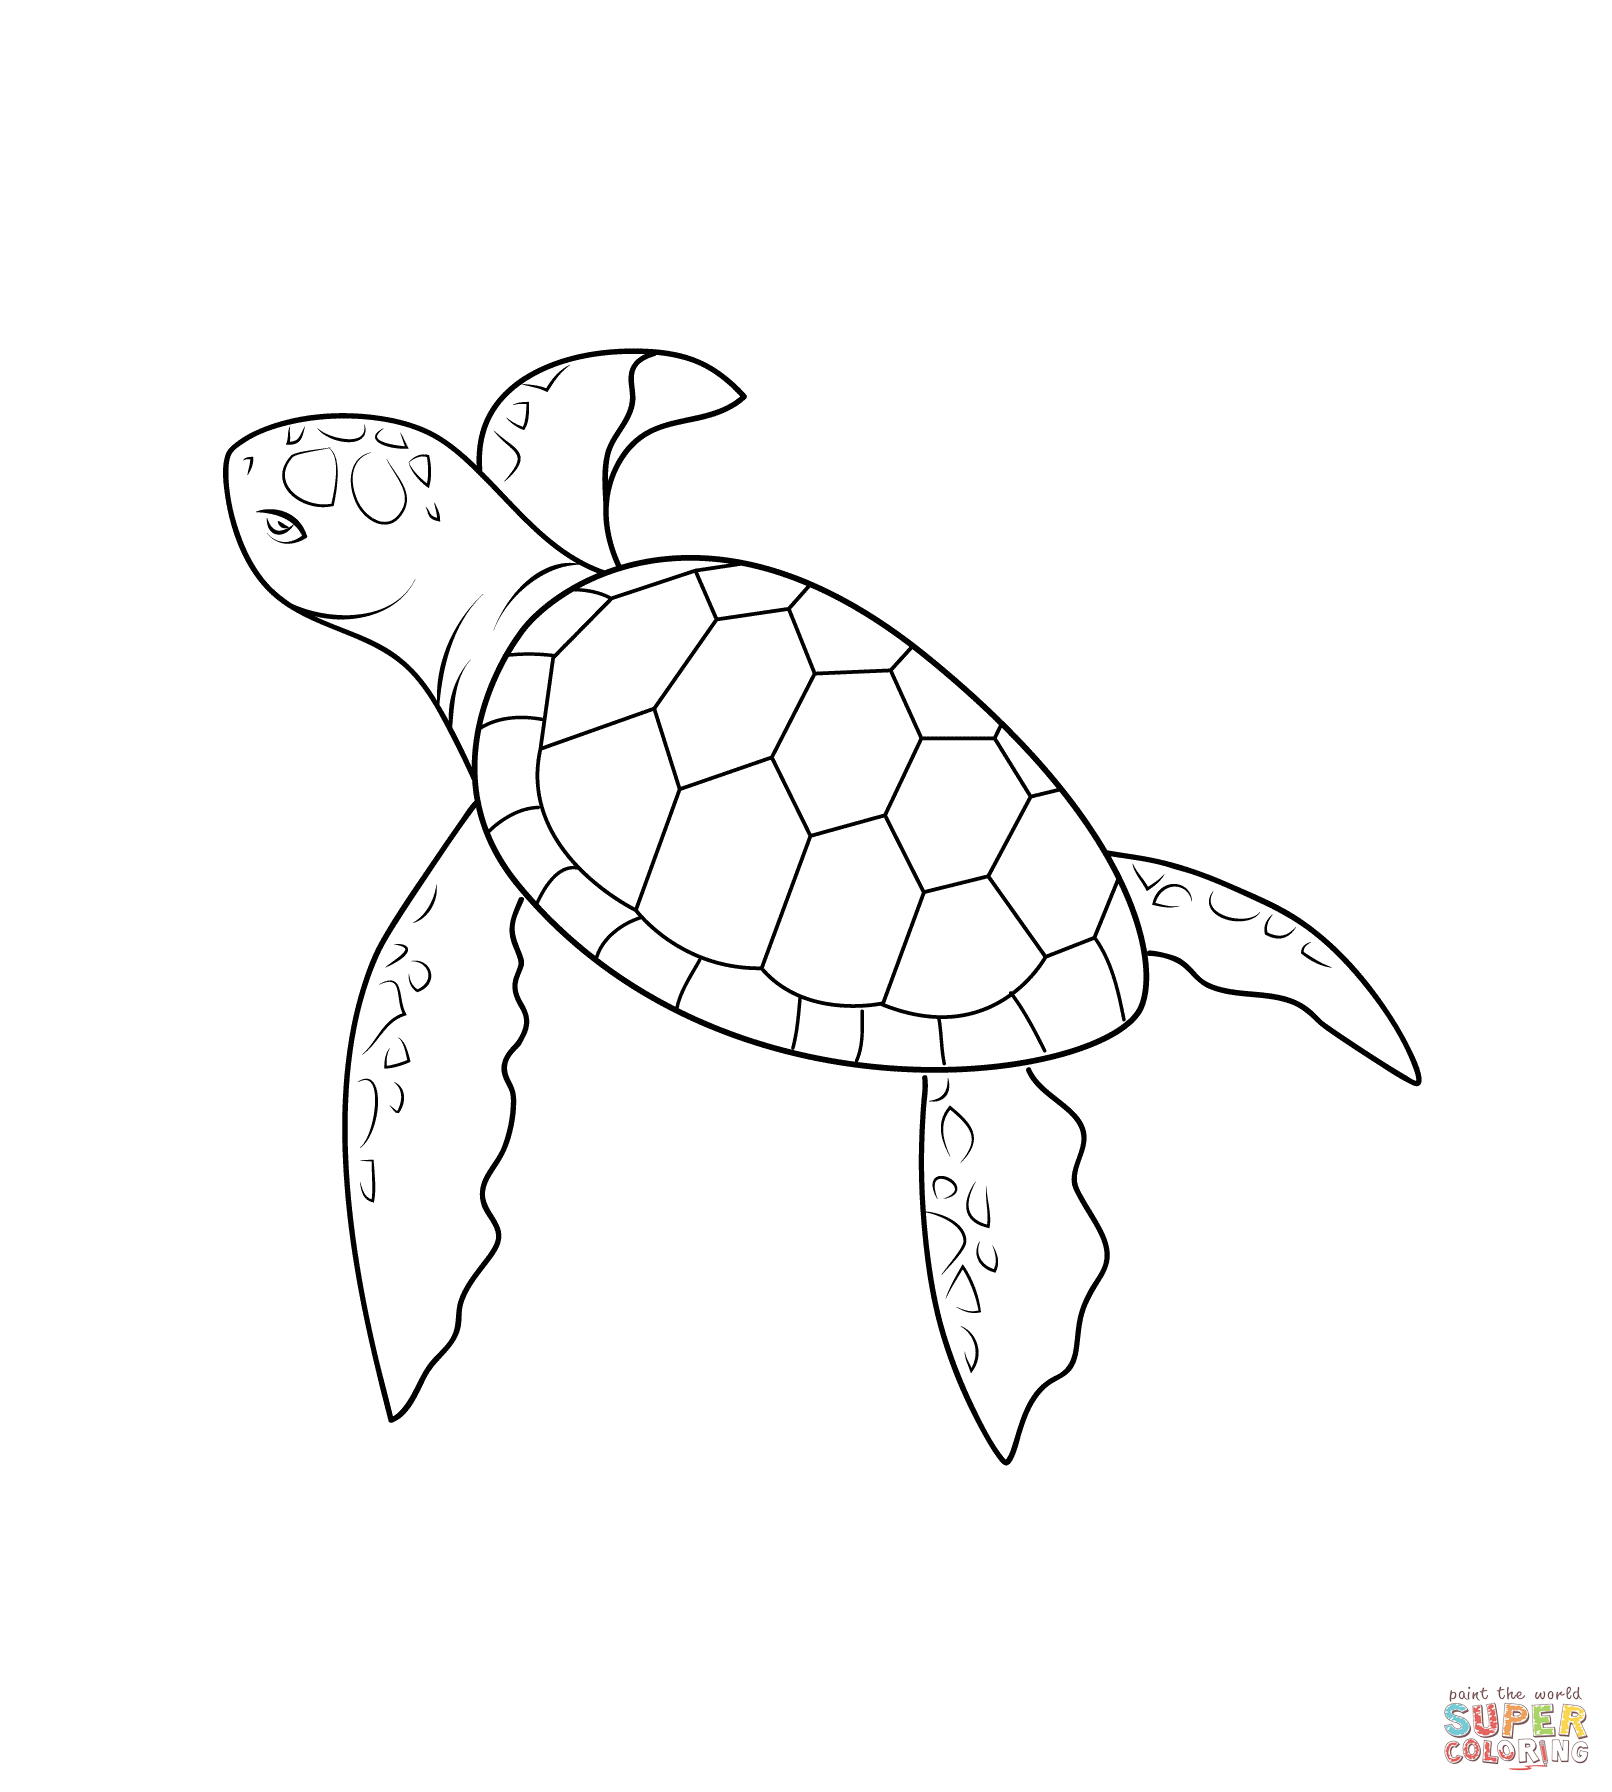 Turtle coloring #11, Download drawings